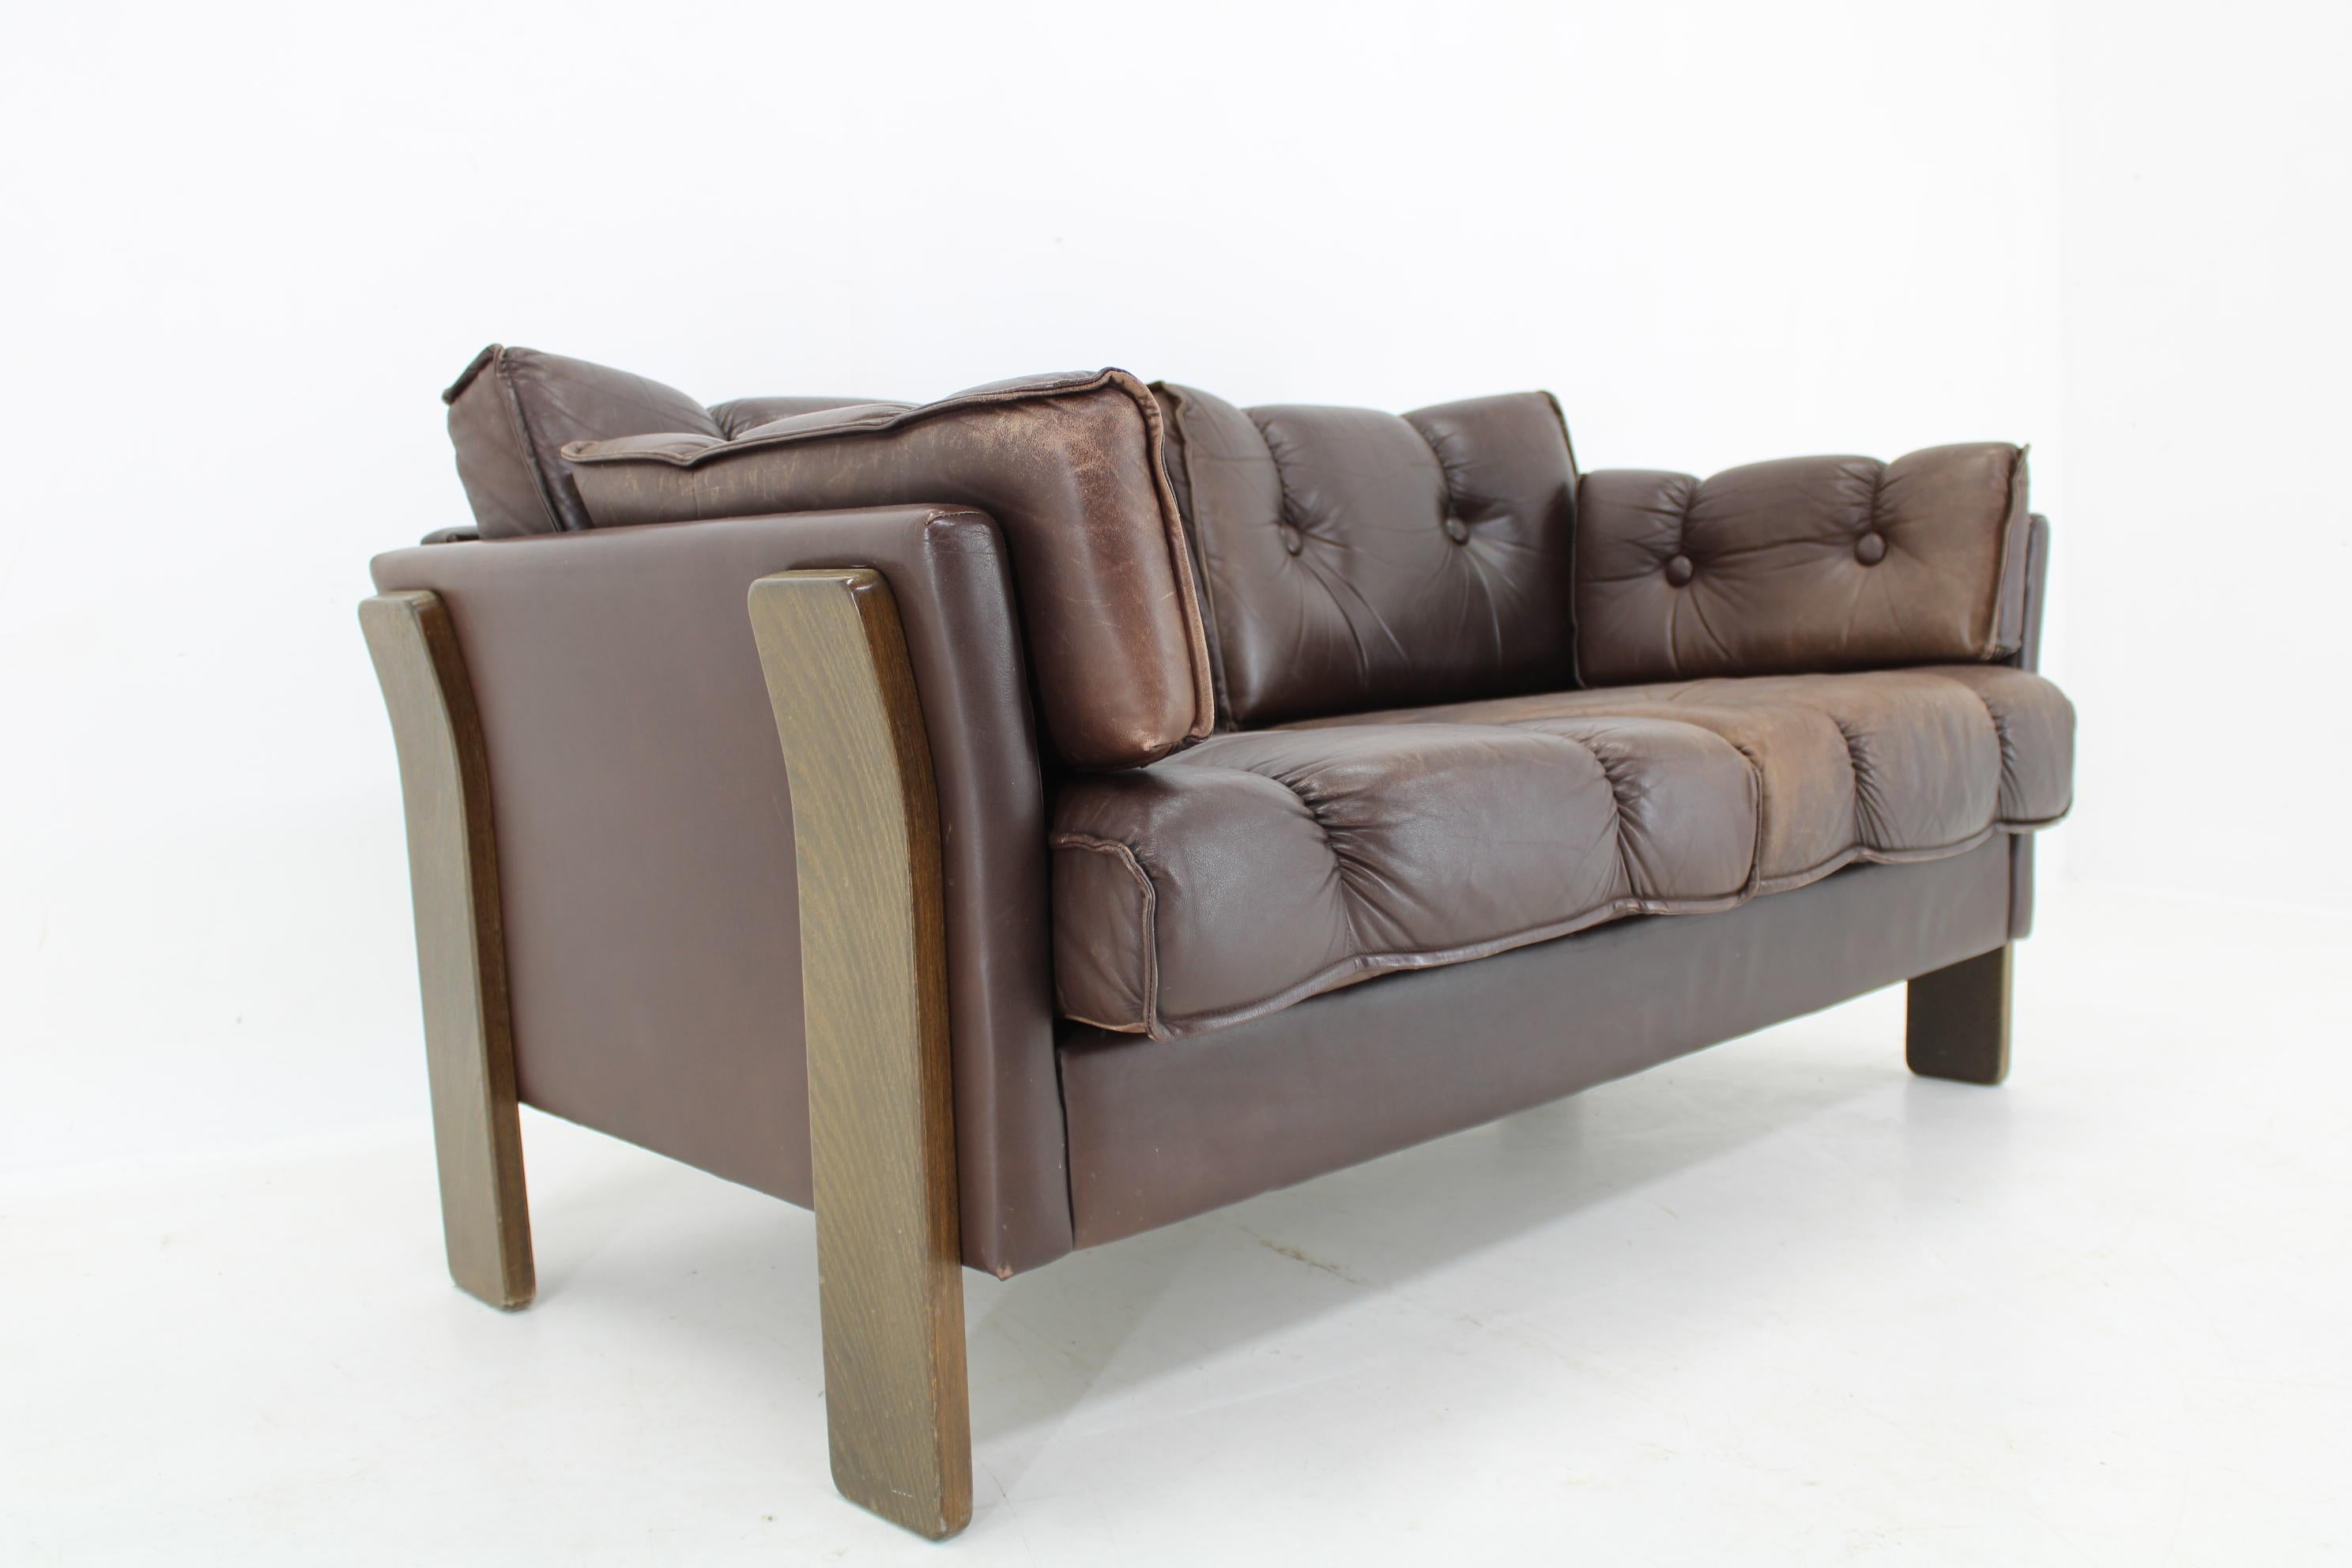 Mid-20th Century 1970s Brown Leather 2-Seater Sofa, Denmark For Sale